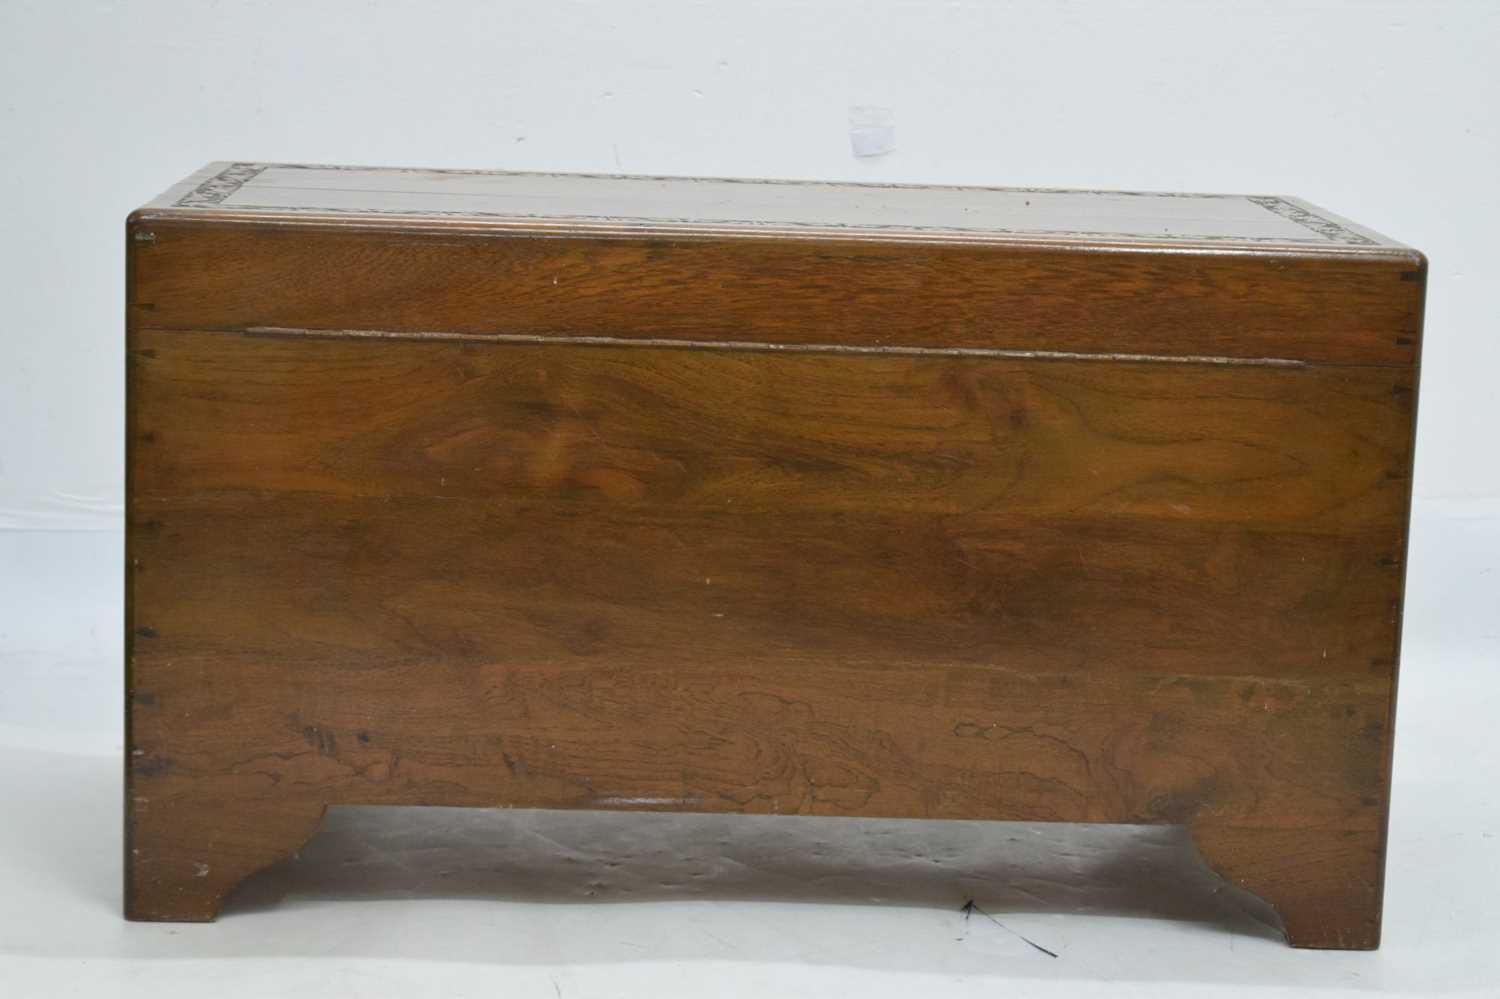 20th century Chinese camphor wood trunk - Image 9 of 10